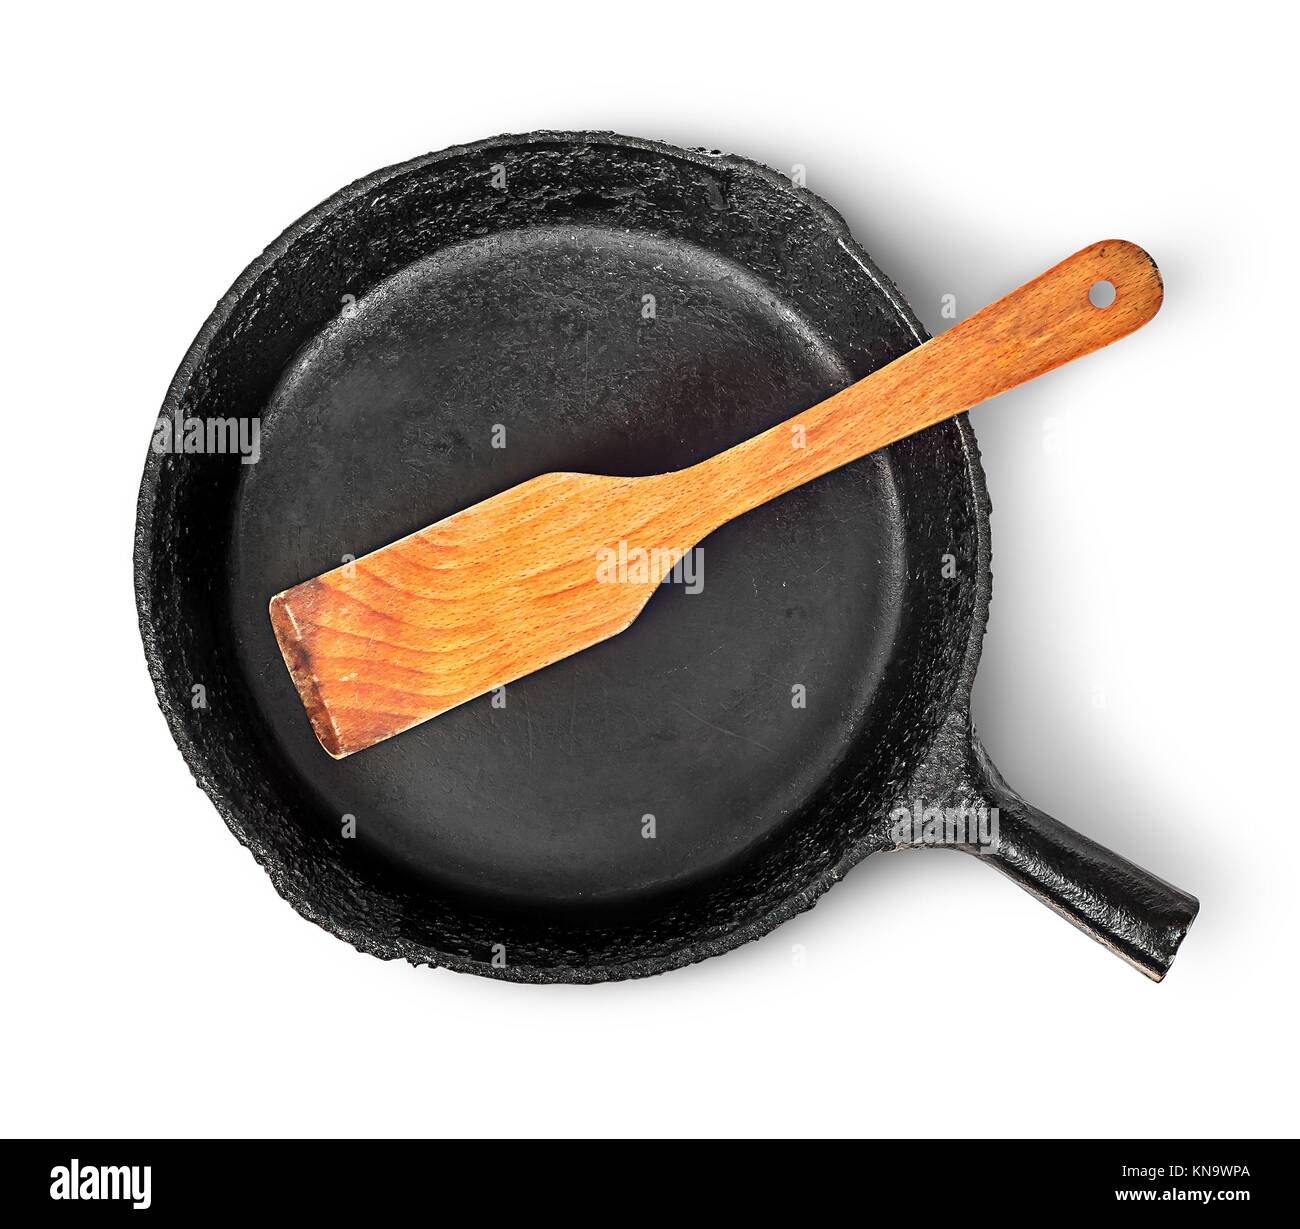 Empty Big Pan And Scoop Or Flipper Used In Frying. Stock Photo